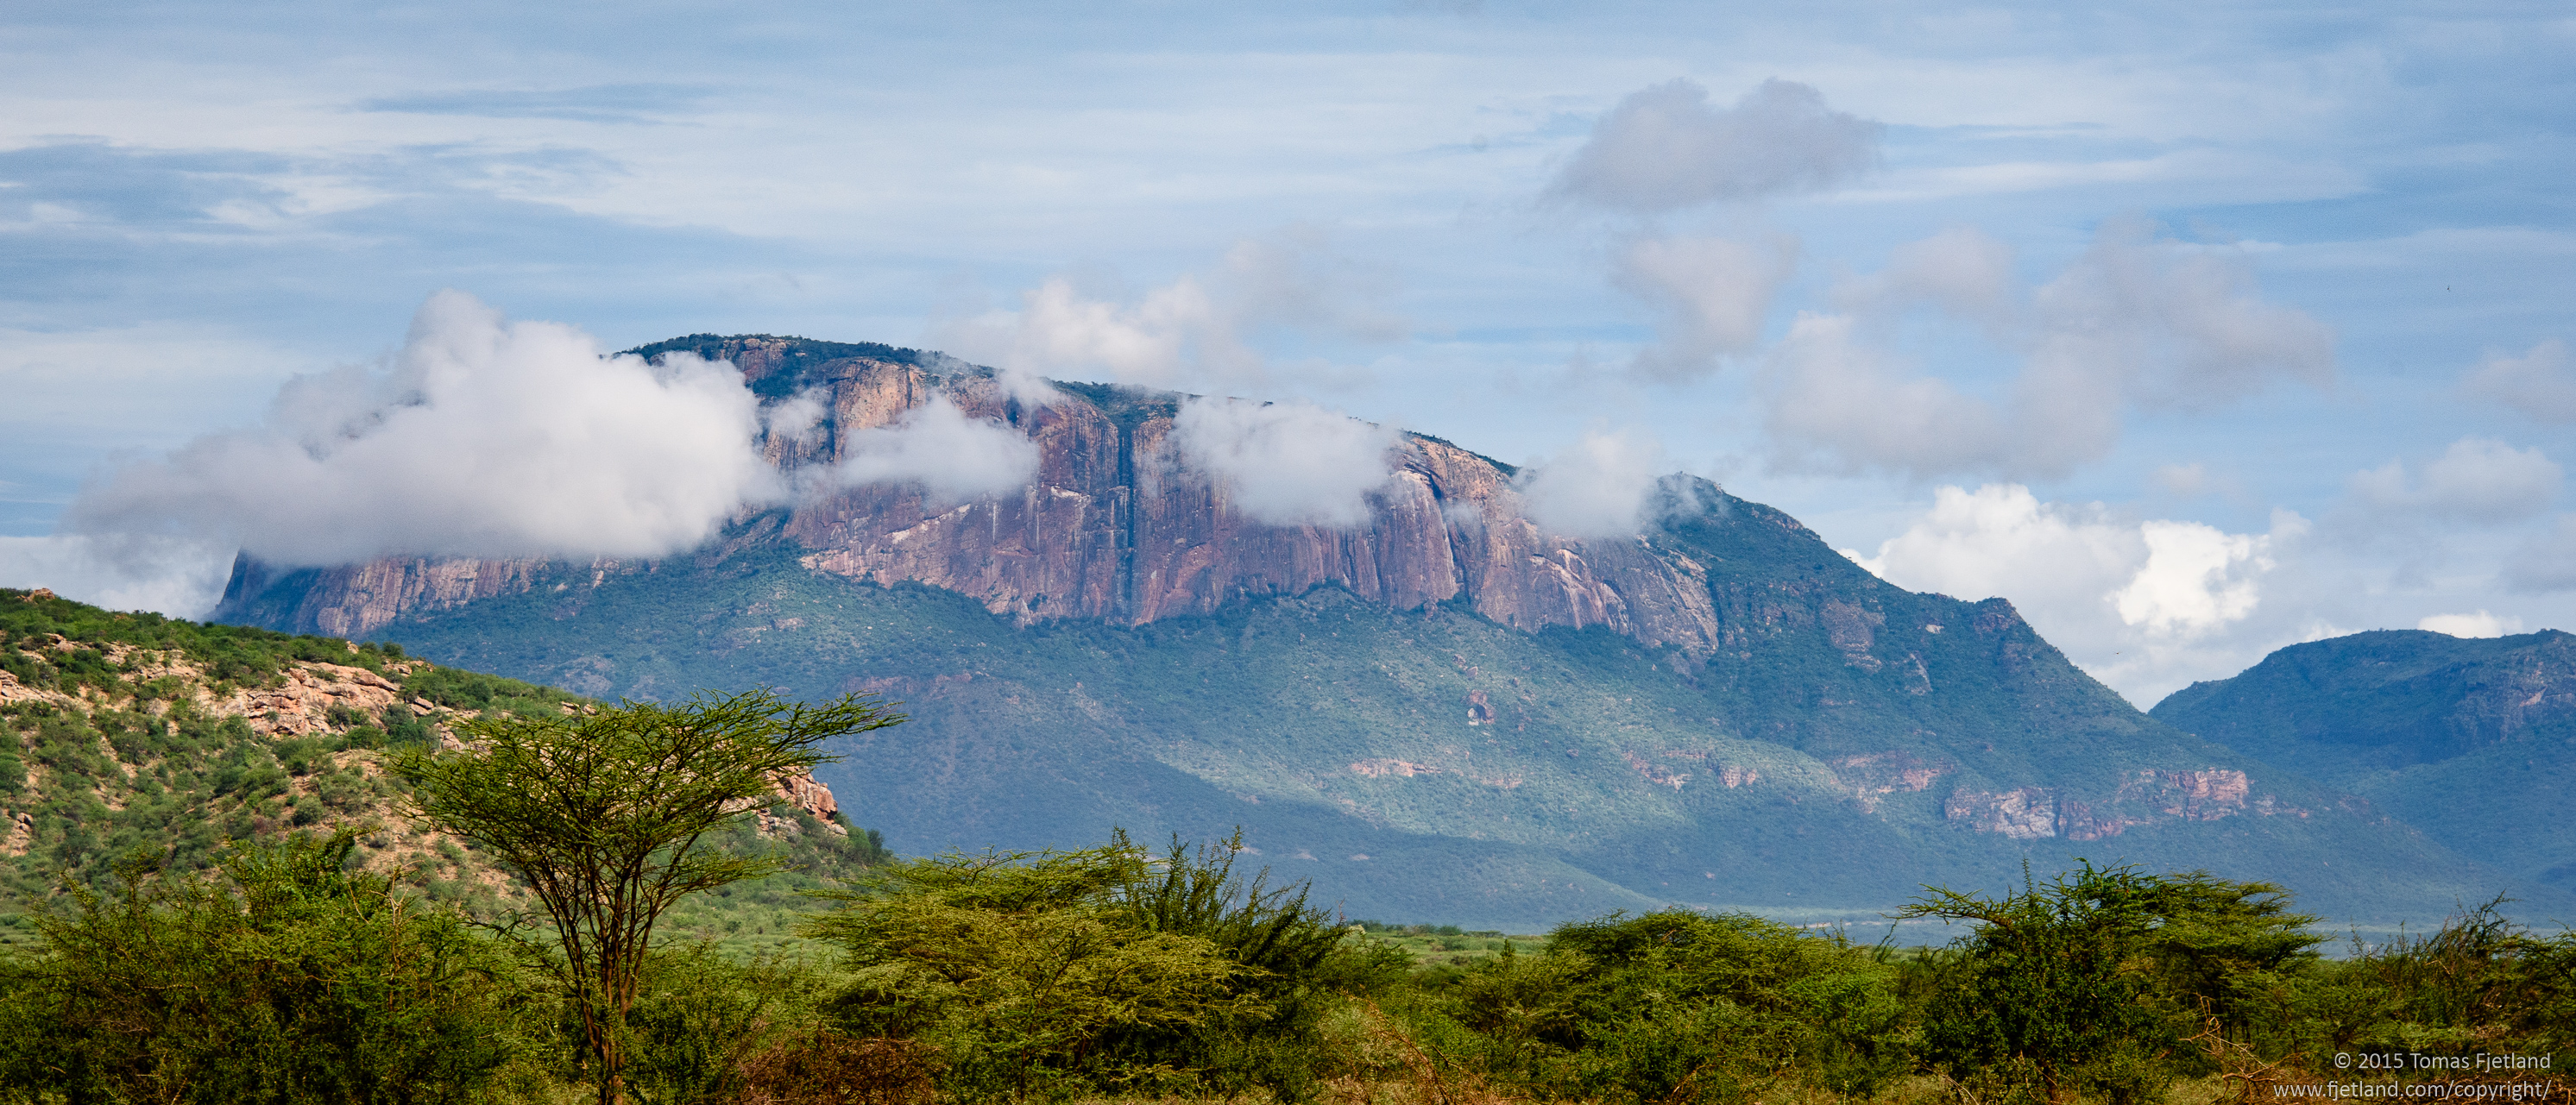 From the Kalama airstrip you can see this mountain to the north. The Samburu in the area considered it sacred